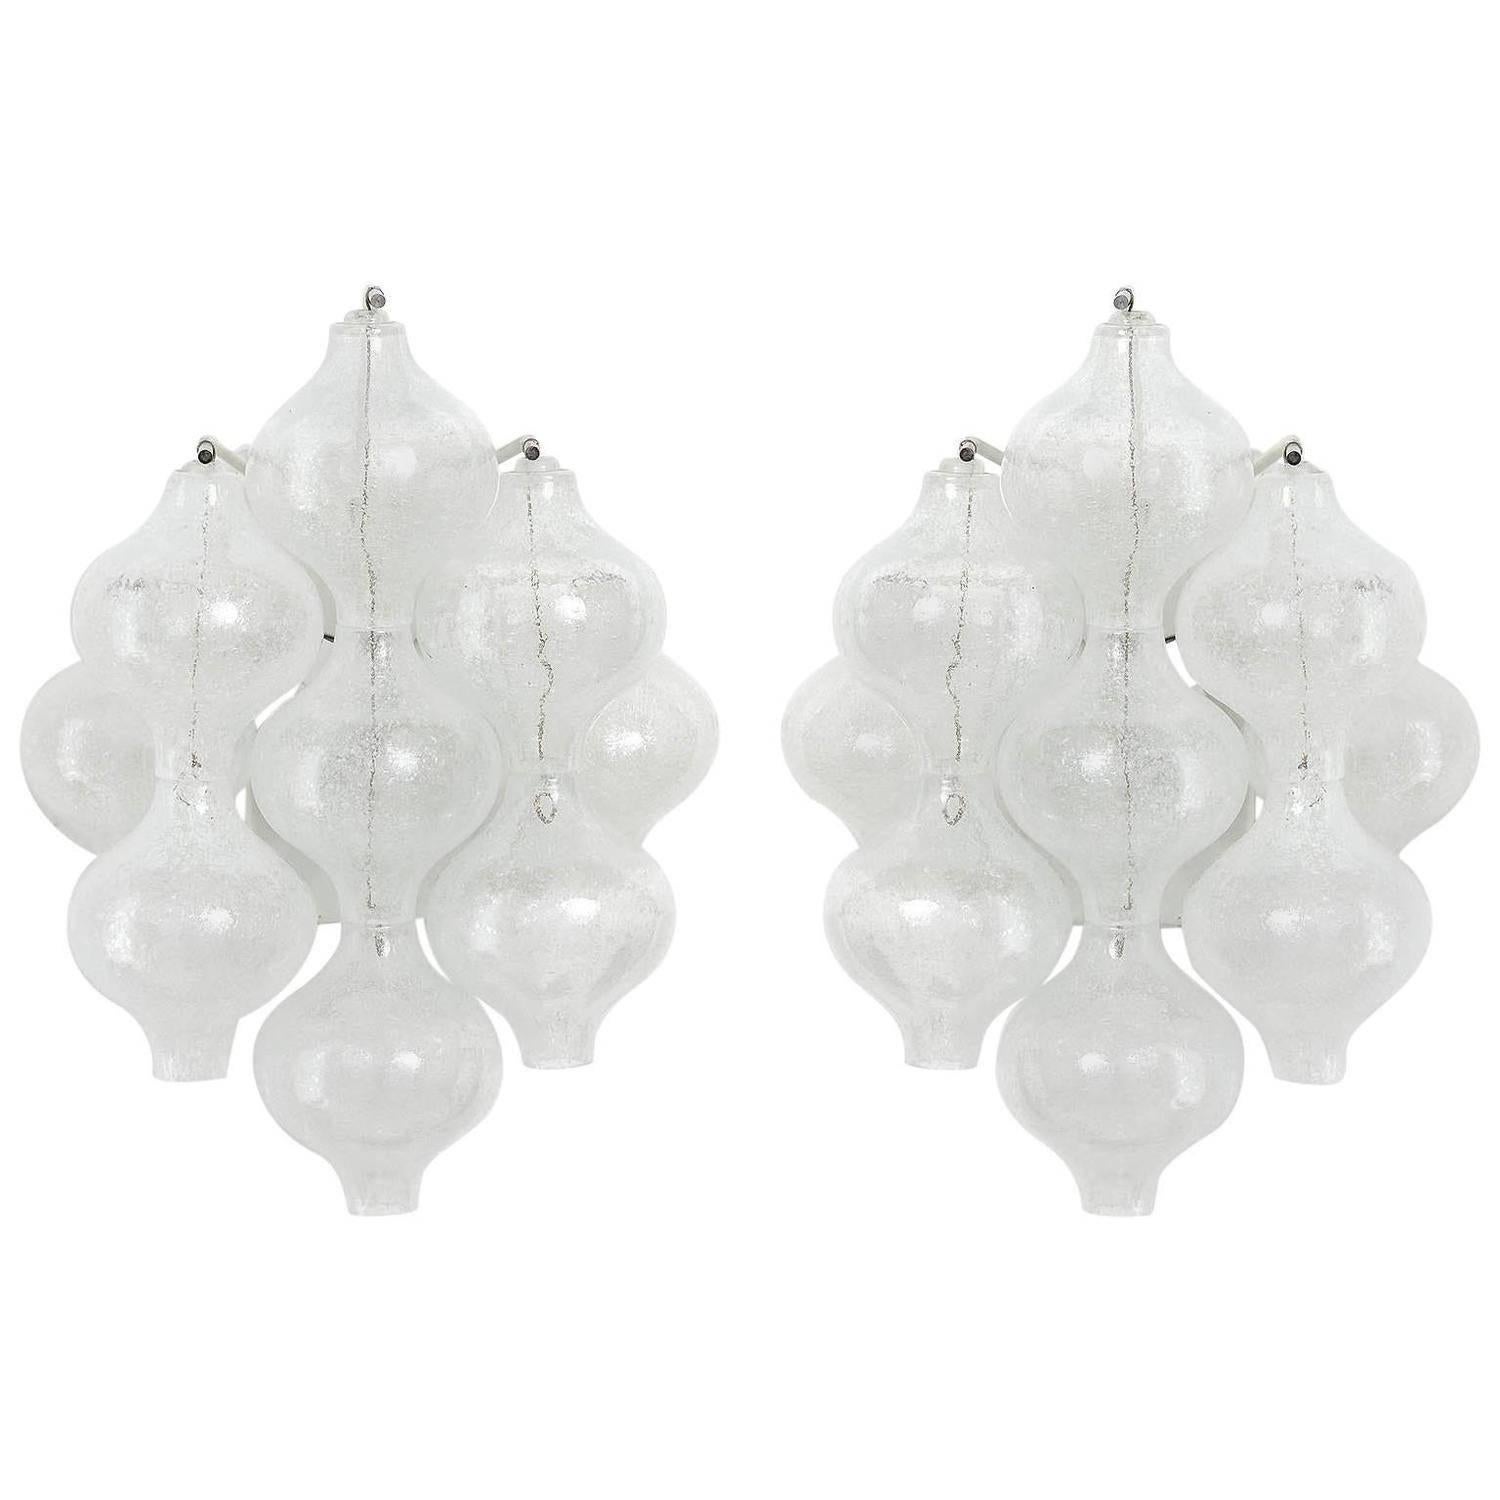 A set of a pendant light fixture model 'Tulipan' and a matching pair of wall lamps by J.T. Kalmar, Vienna, Austria, manufactured in midcentury, circa 1970, (late 1960s-early 1970s).
The name Tulipan derives from the tulip shaped hand blown bubble